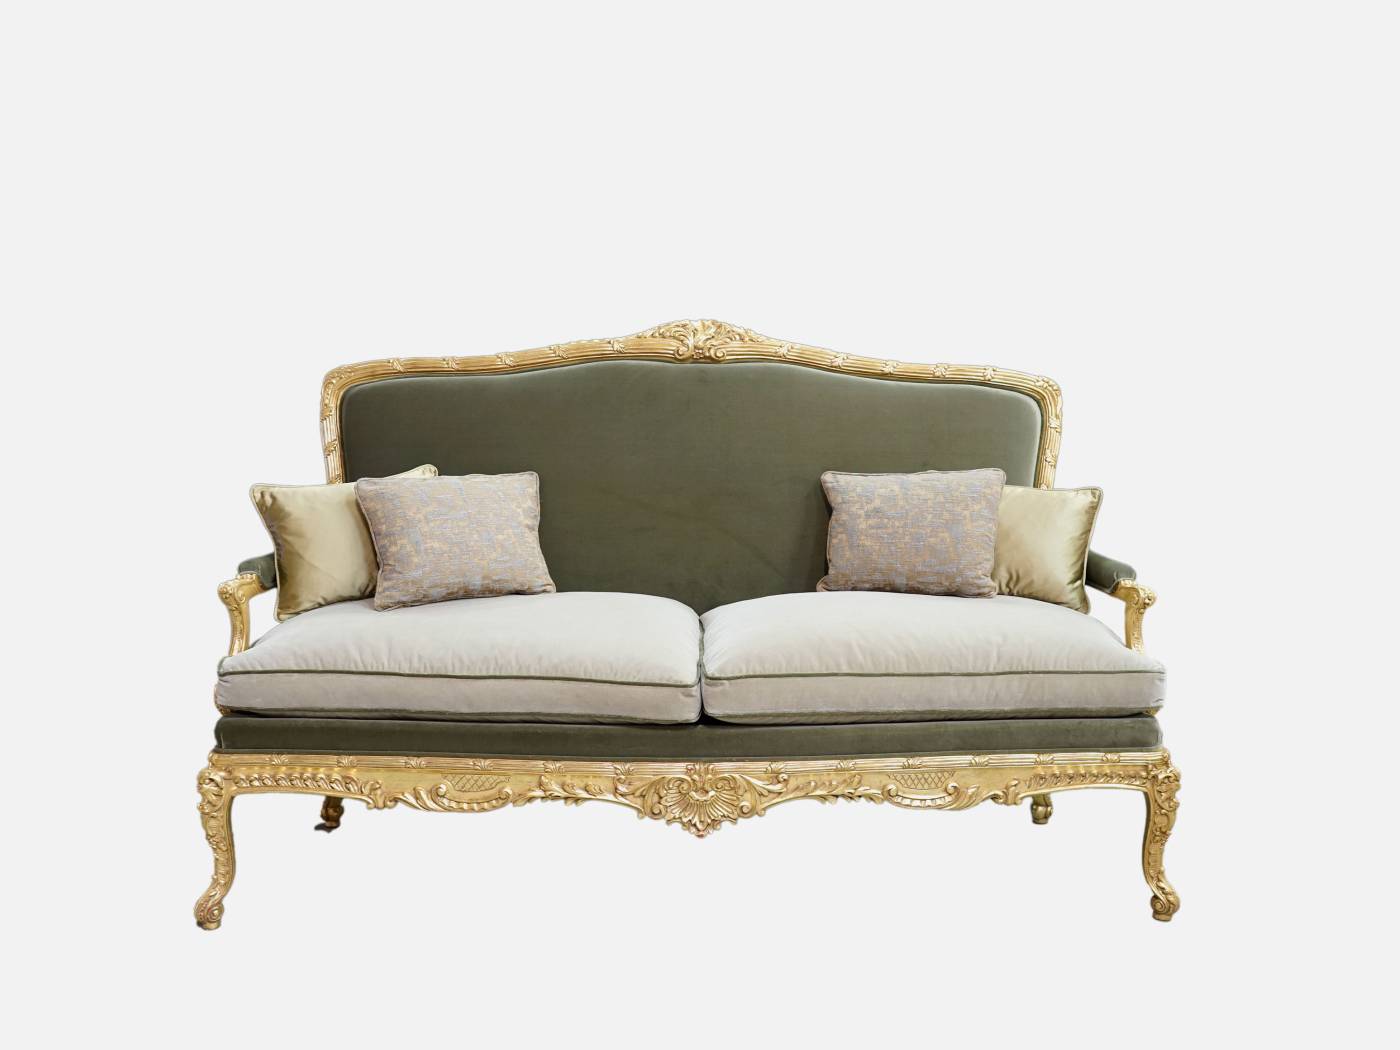 ART. 2191 - C.G. Capelletti quality furniture and timeless elegance with luxury made in italy contemporary Sofas.